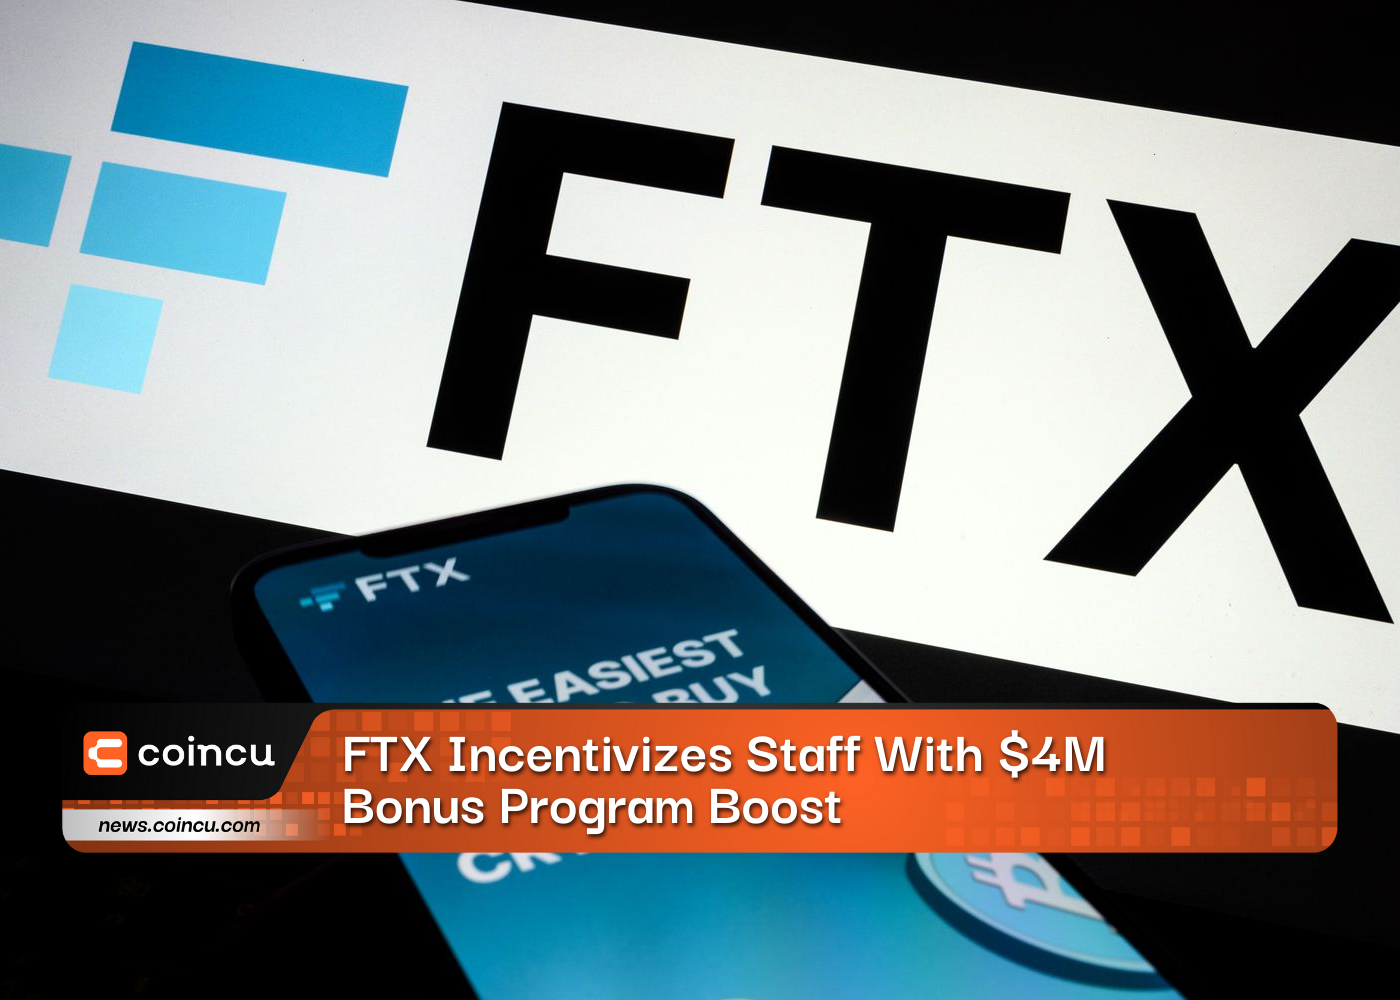 FTX Incentivizes Staff With 4M